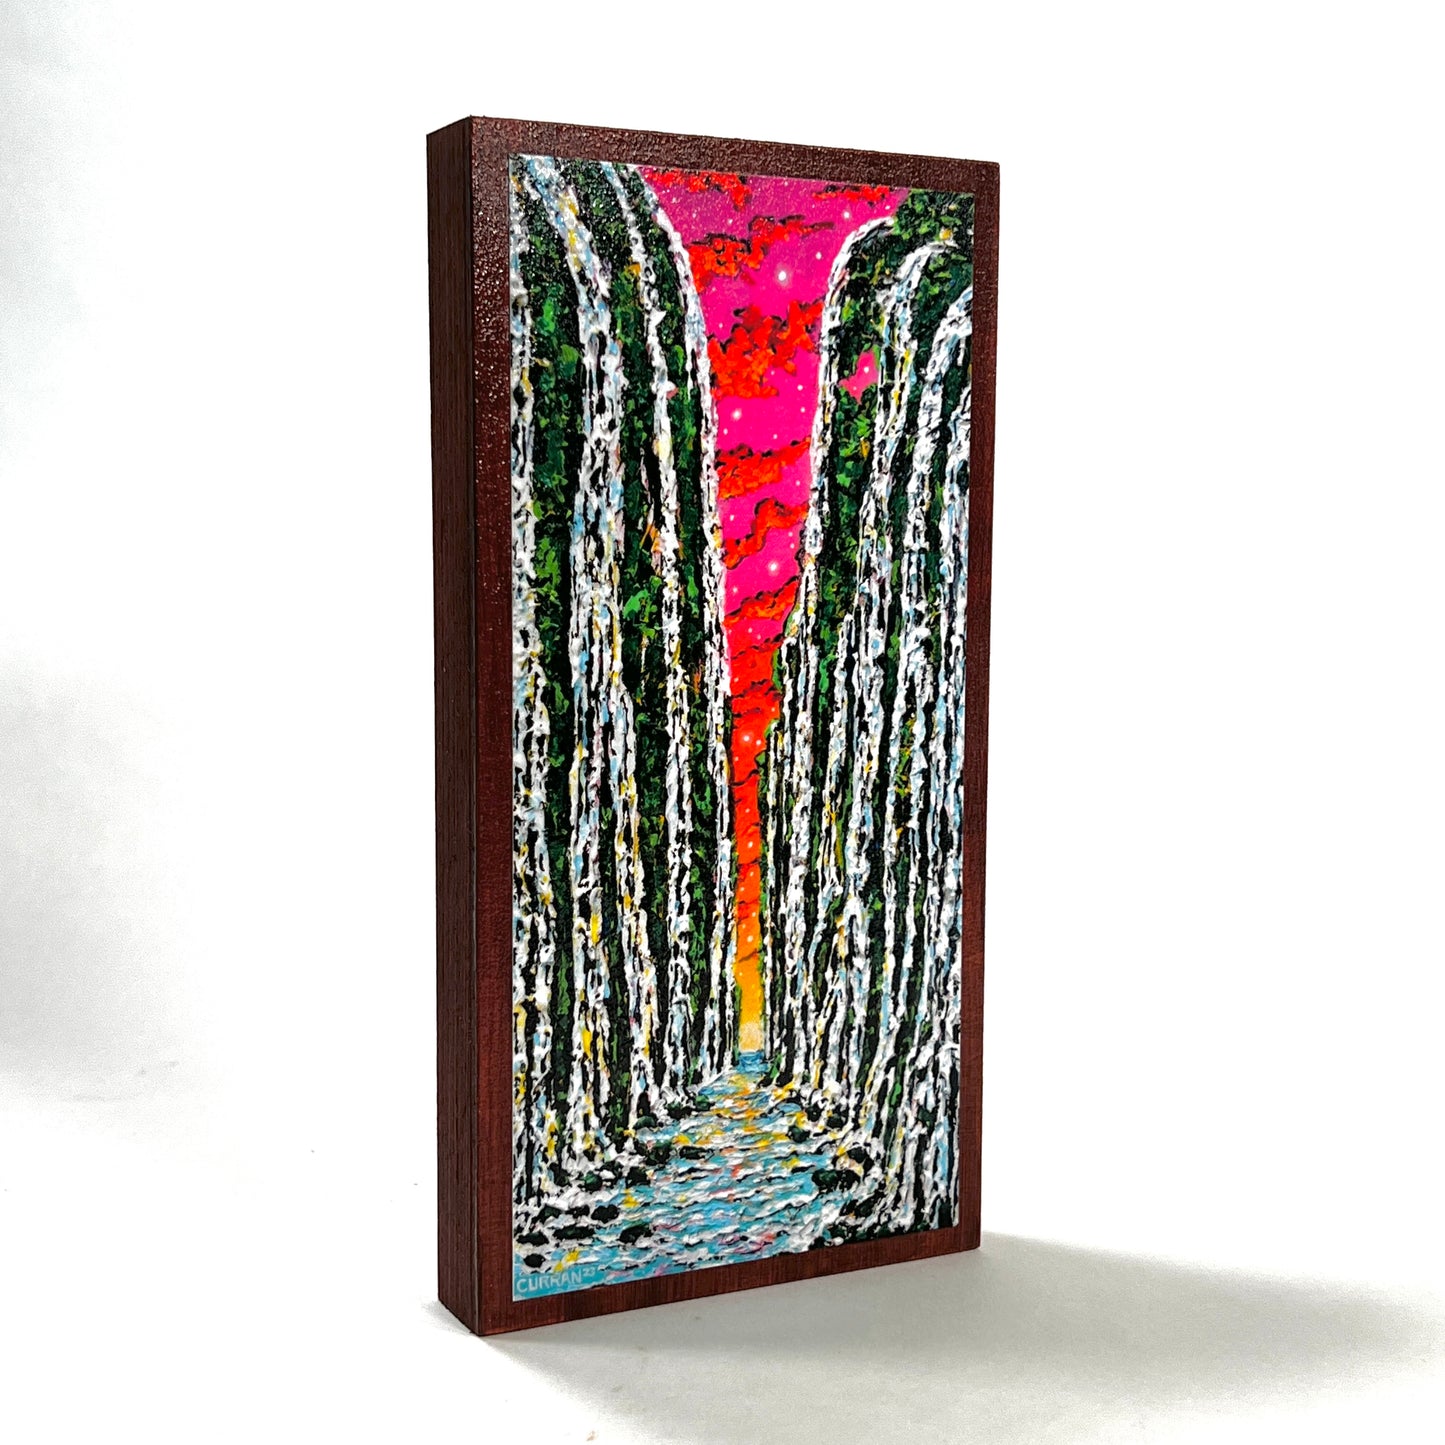 Tunnel of Falls wood panel (Limited Edition)